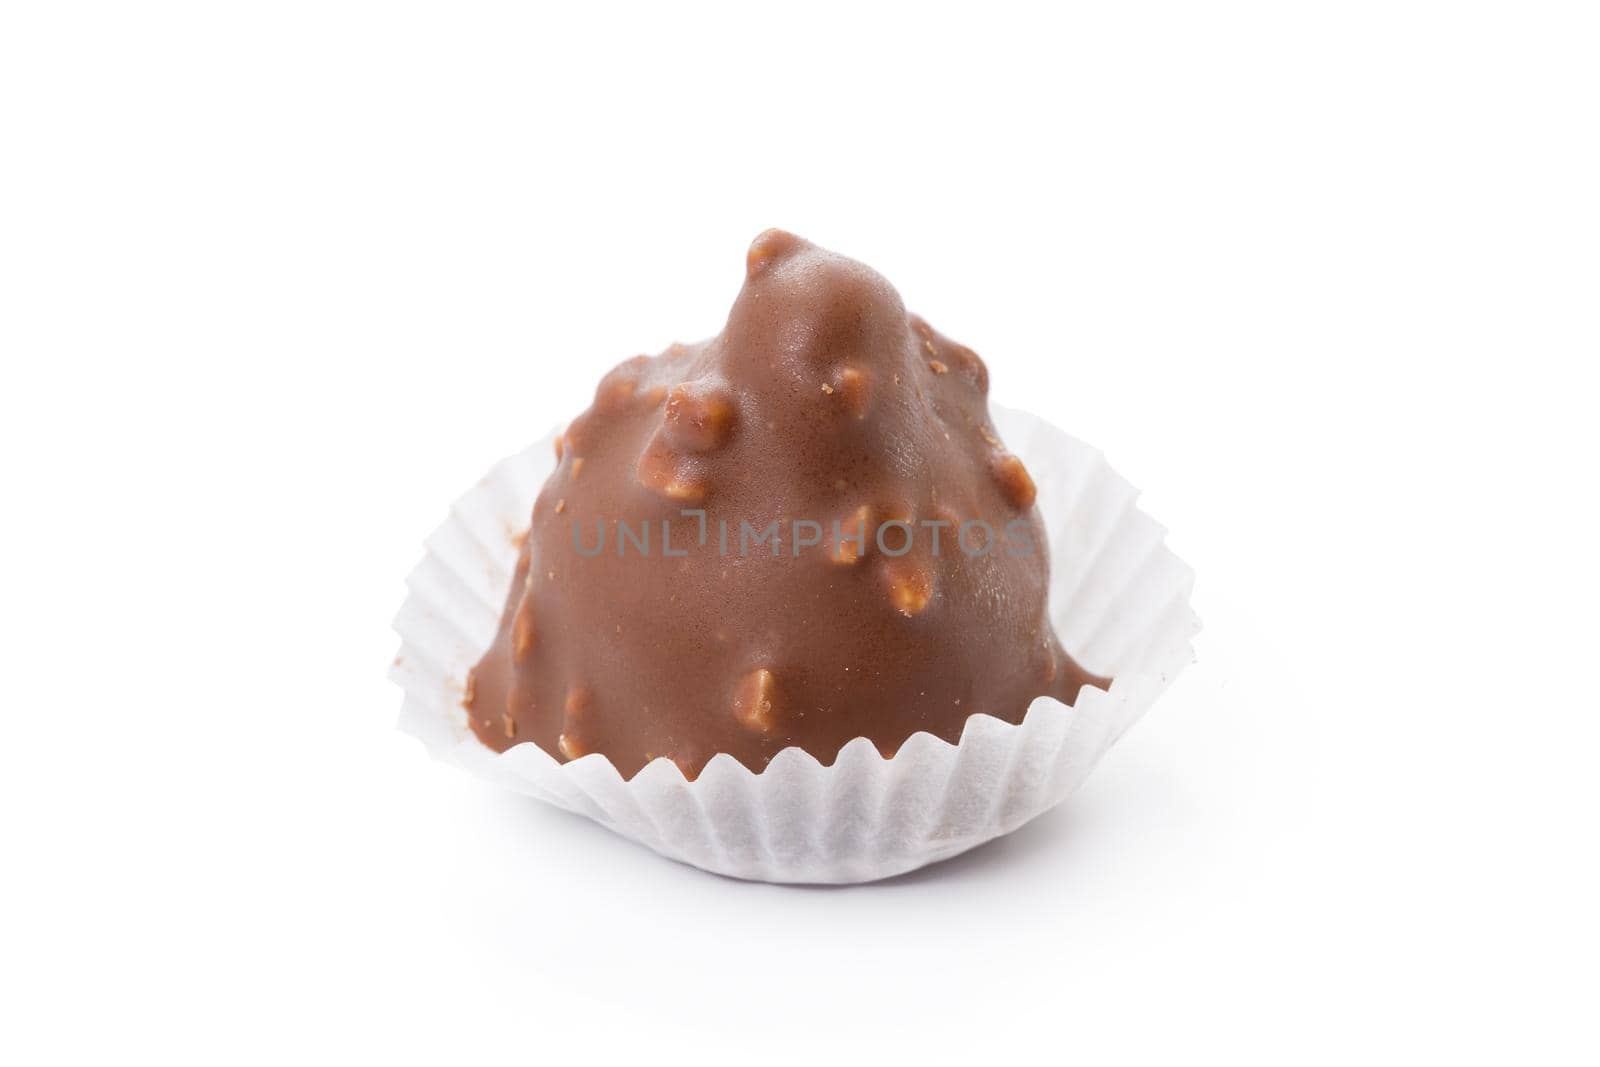 One homemade chocolate candy isolated on white by Fabrikasimf